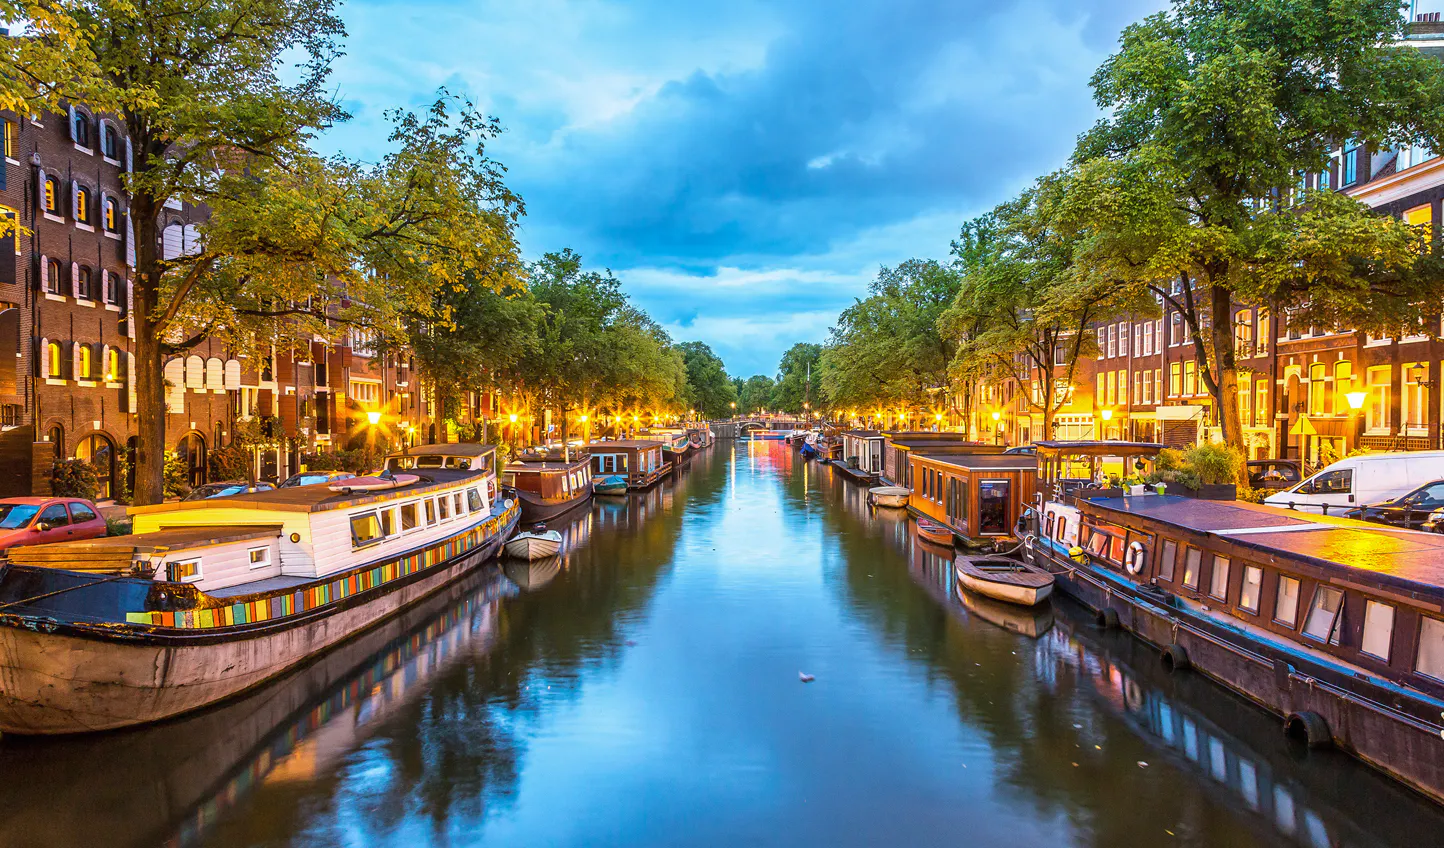 Which Dutch canal city is known as 'The Venice of the North'?